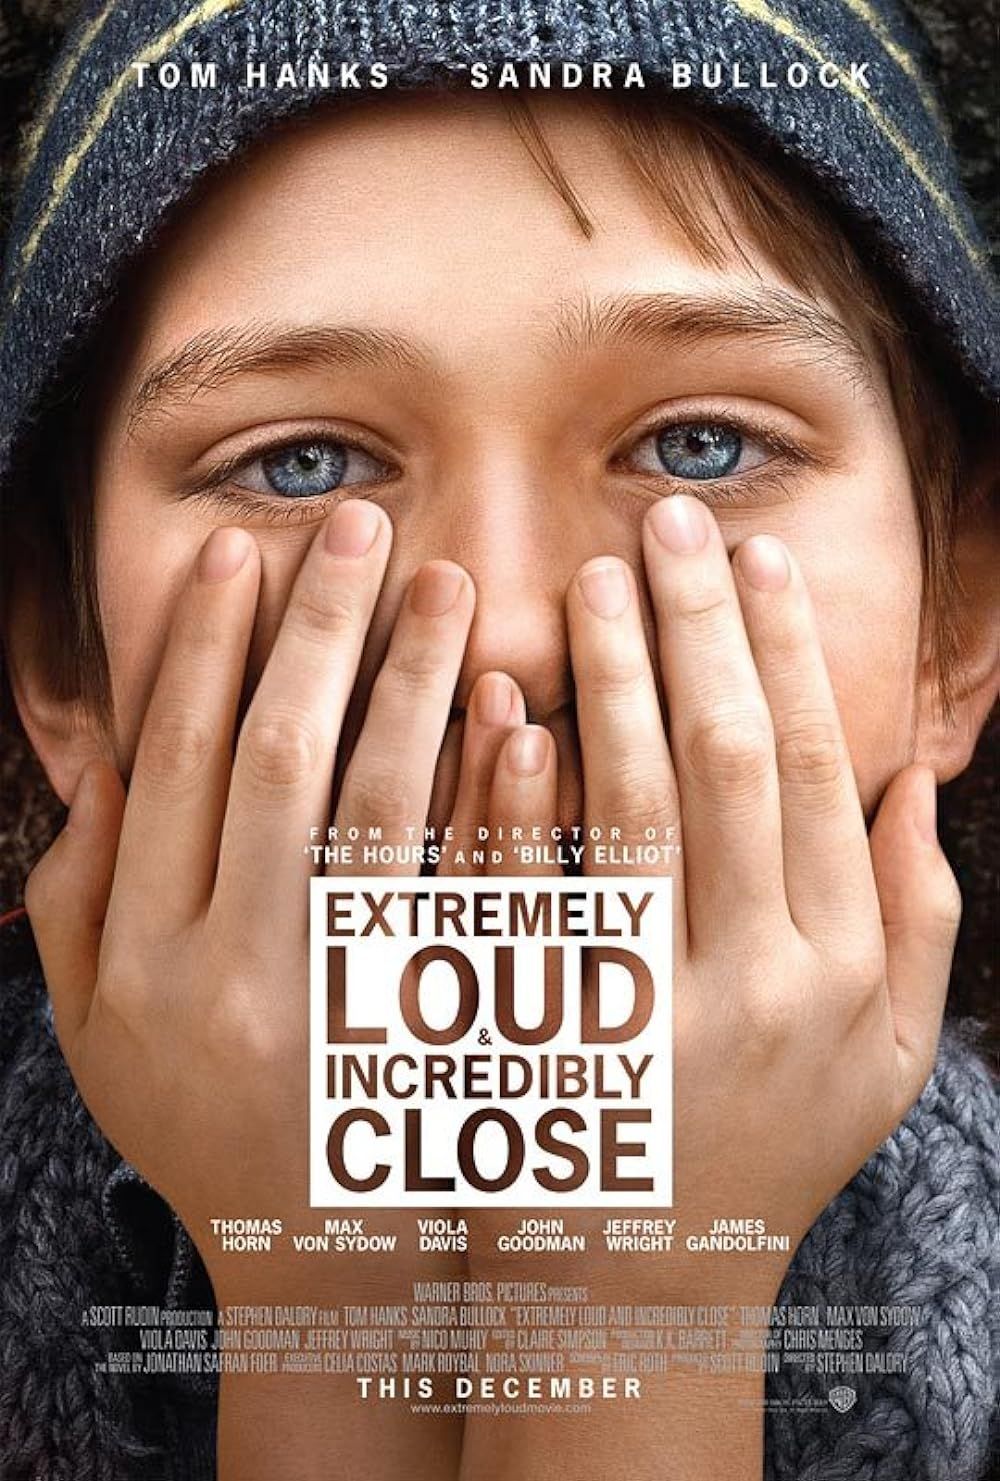 Thomas Horn stares directly at the viewer on the poster for Extremely Loud and Incredibly Close